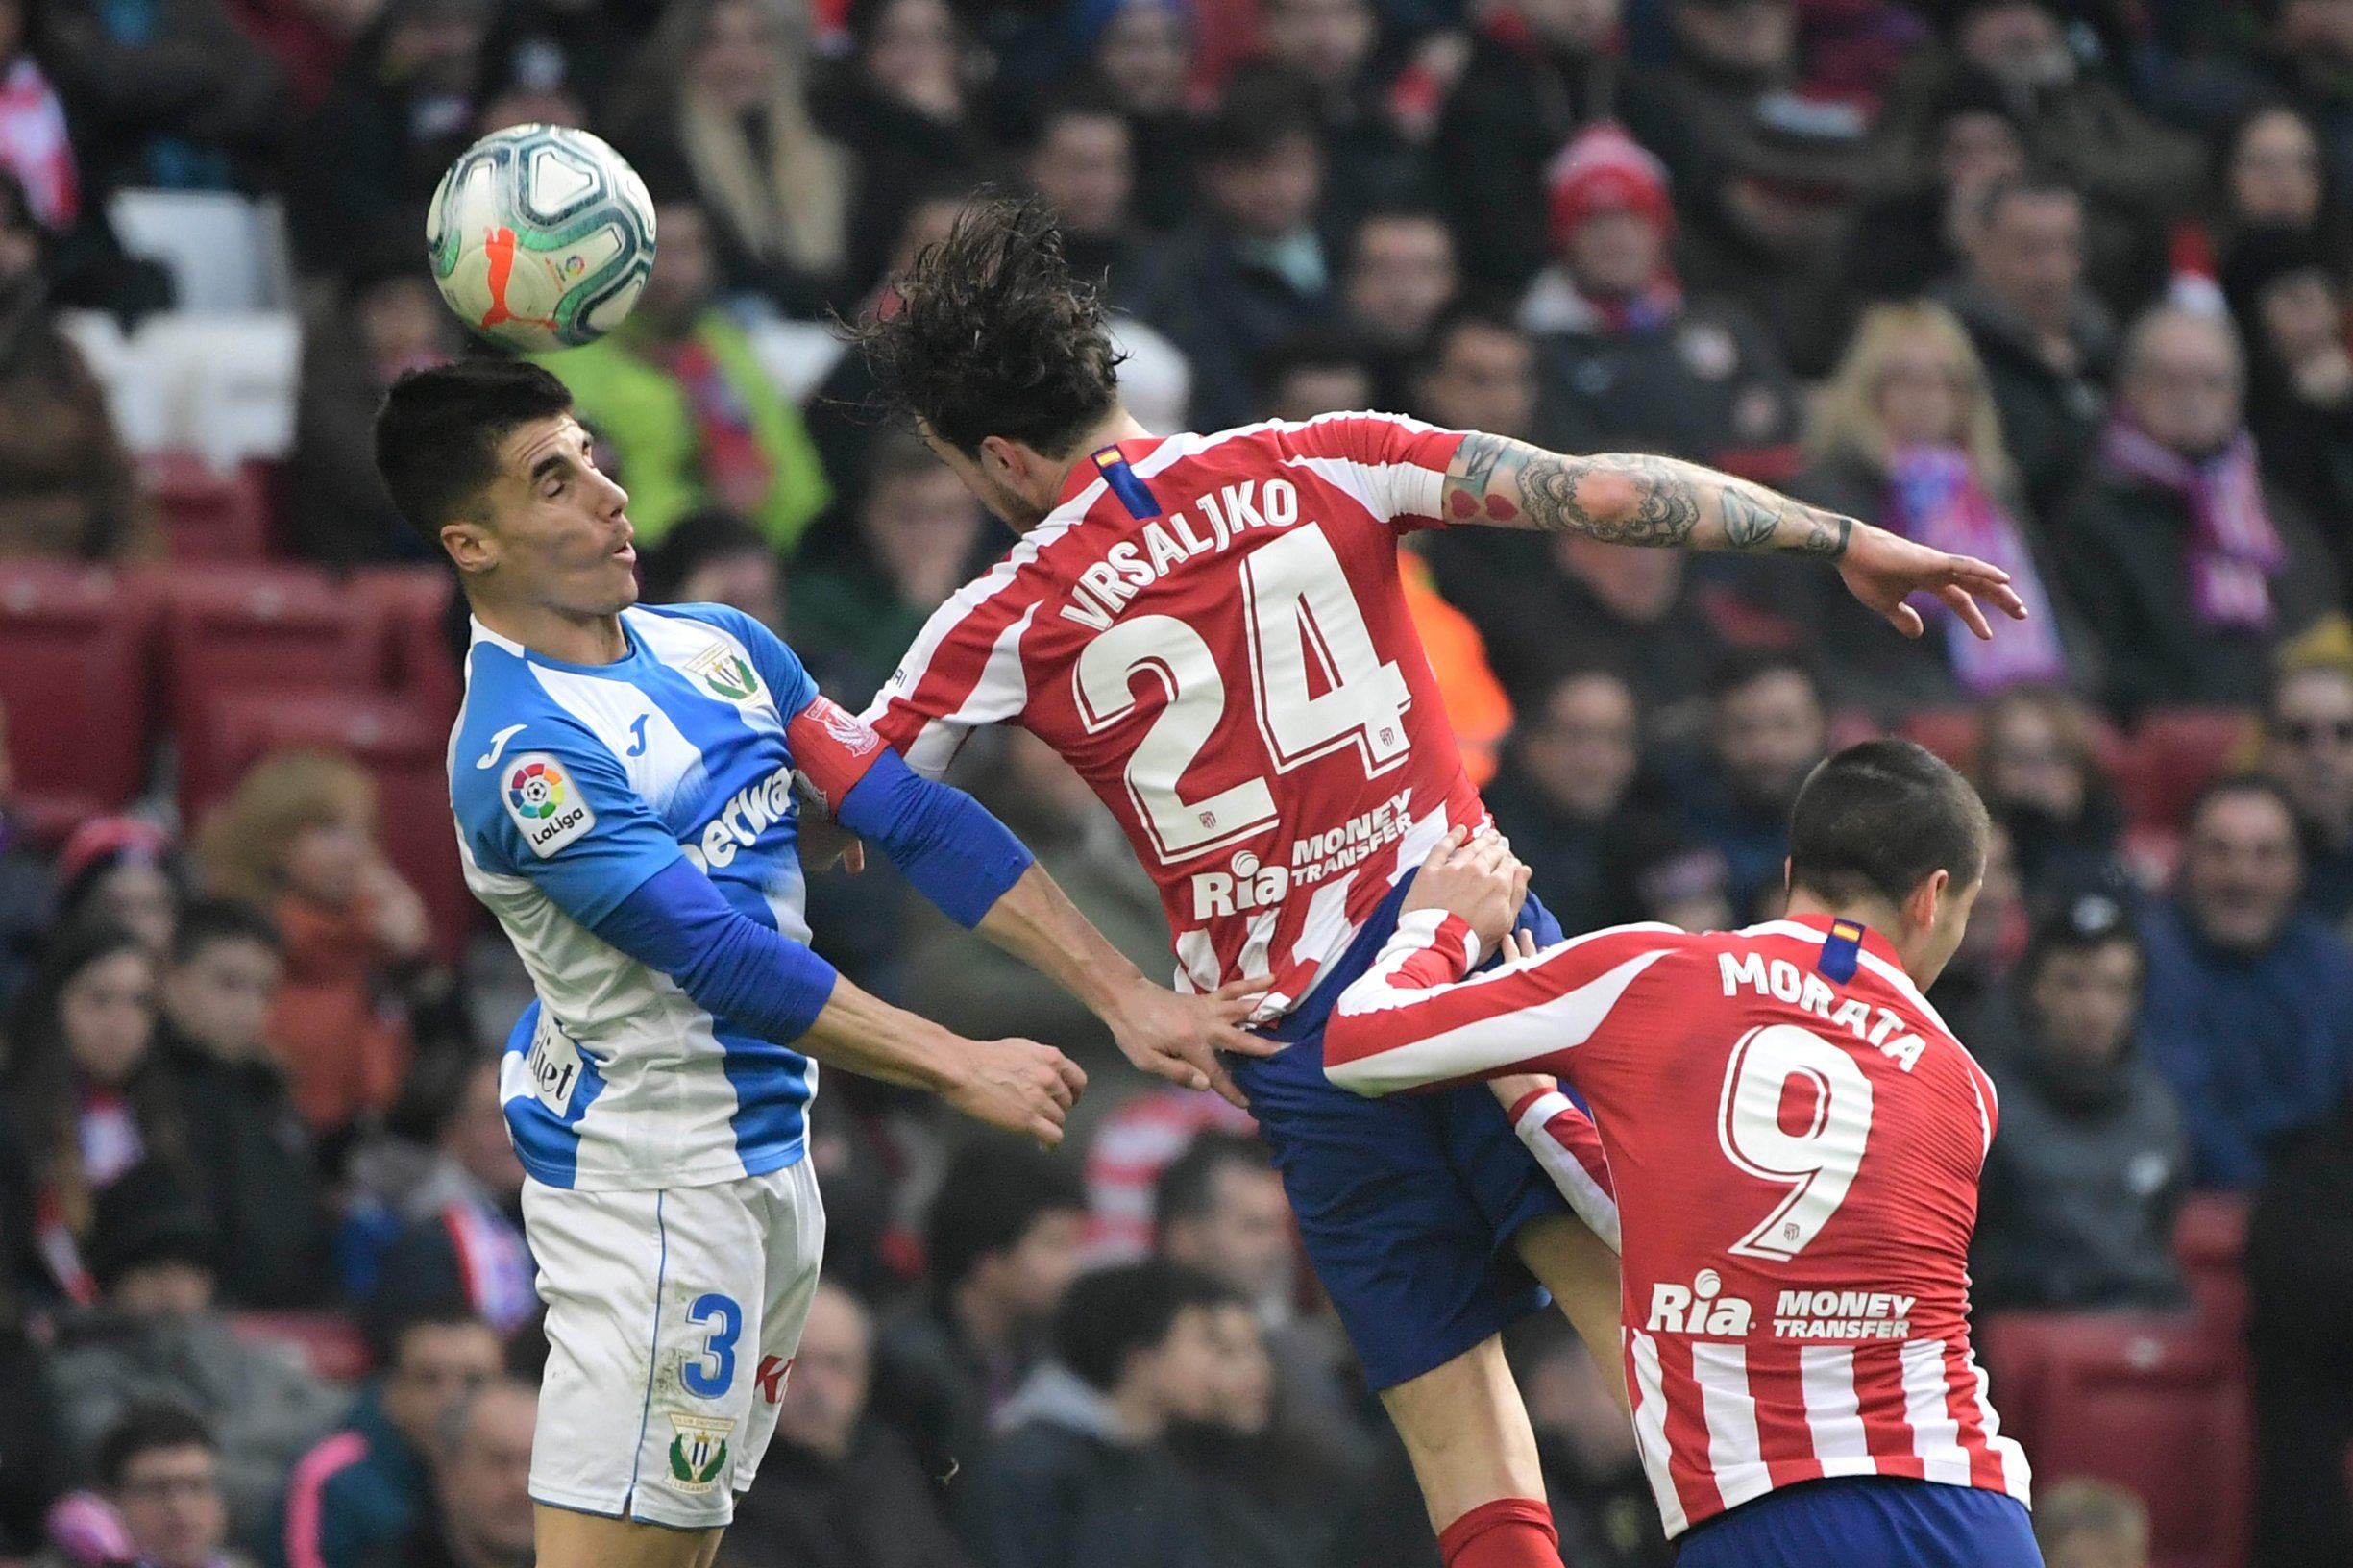 (FromL) Leganes' Spanish defender Unai Bustinza, Atletico Madrid's Croatian defender Sime Vrsaljko and Atletico Madrid's Spanish forward Alvaro Morata jump for the ball during the Spanish league football match Club Atletico de Madrid against Club Deportivo Leganes SAD at the Wanda Metropolitano stadium in Madrid on January 26, 2020. (Photo by JAVIER SORIANO / AFP)